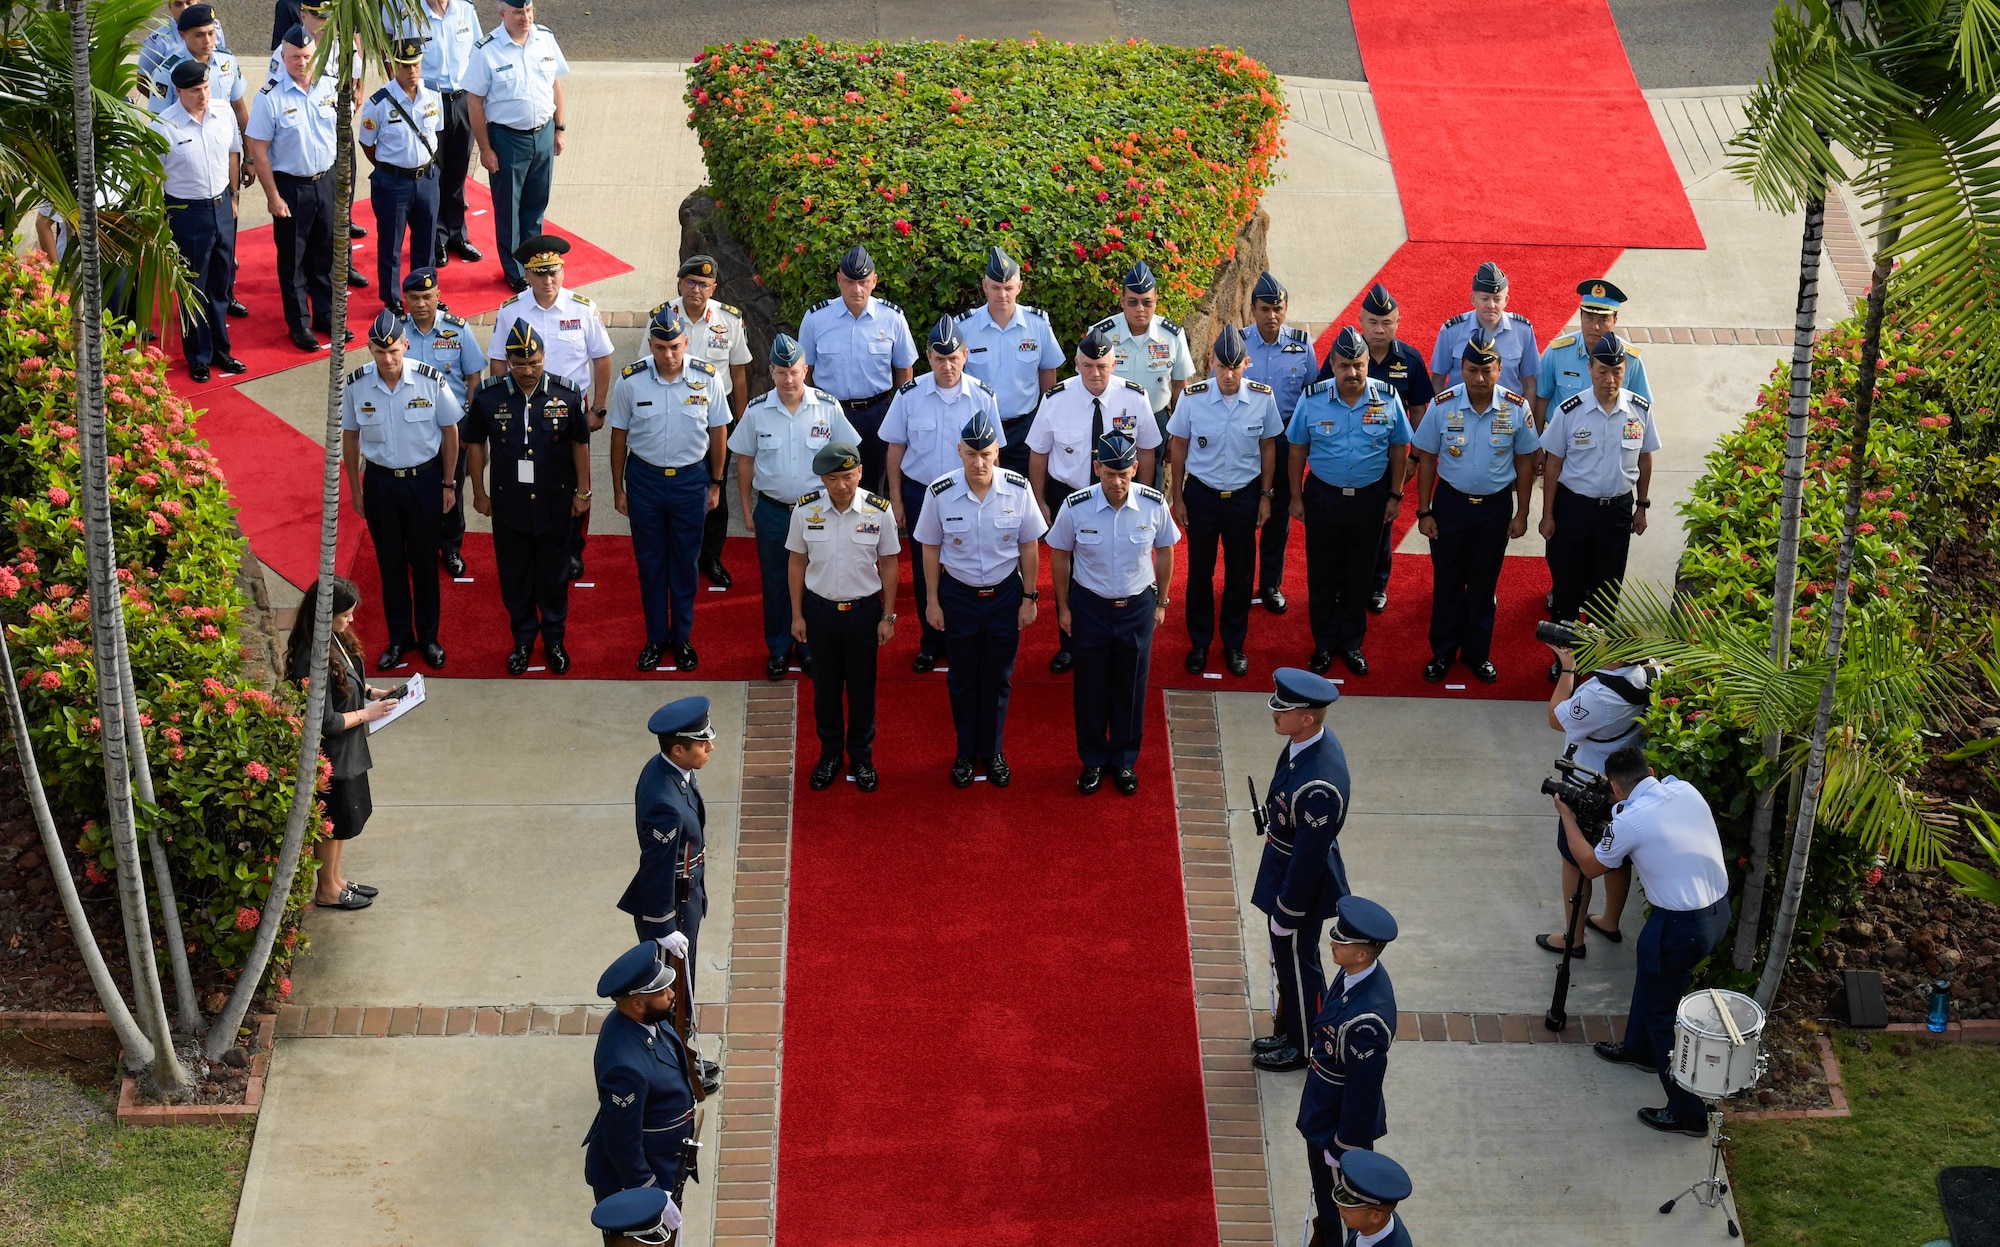 Air chiefs and senior enlisted leaders from more than 20 countries stand in formation during the opening ceremony of the Pacific Air Chiefs Symposium 2023 at Joint Base Pearl Harbor-Hickam, Hawaii, Nov. 14, 2023. The vision of a free and open Indo-Pacific is shared across the globe – and is achievable together. (U.S. Air Force photo by Airman 1st Class Caroline Strickland)